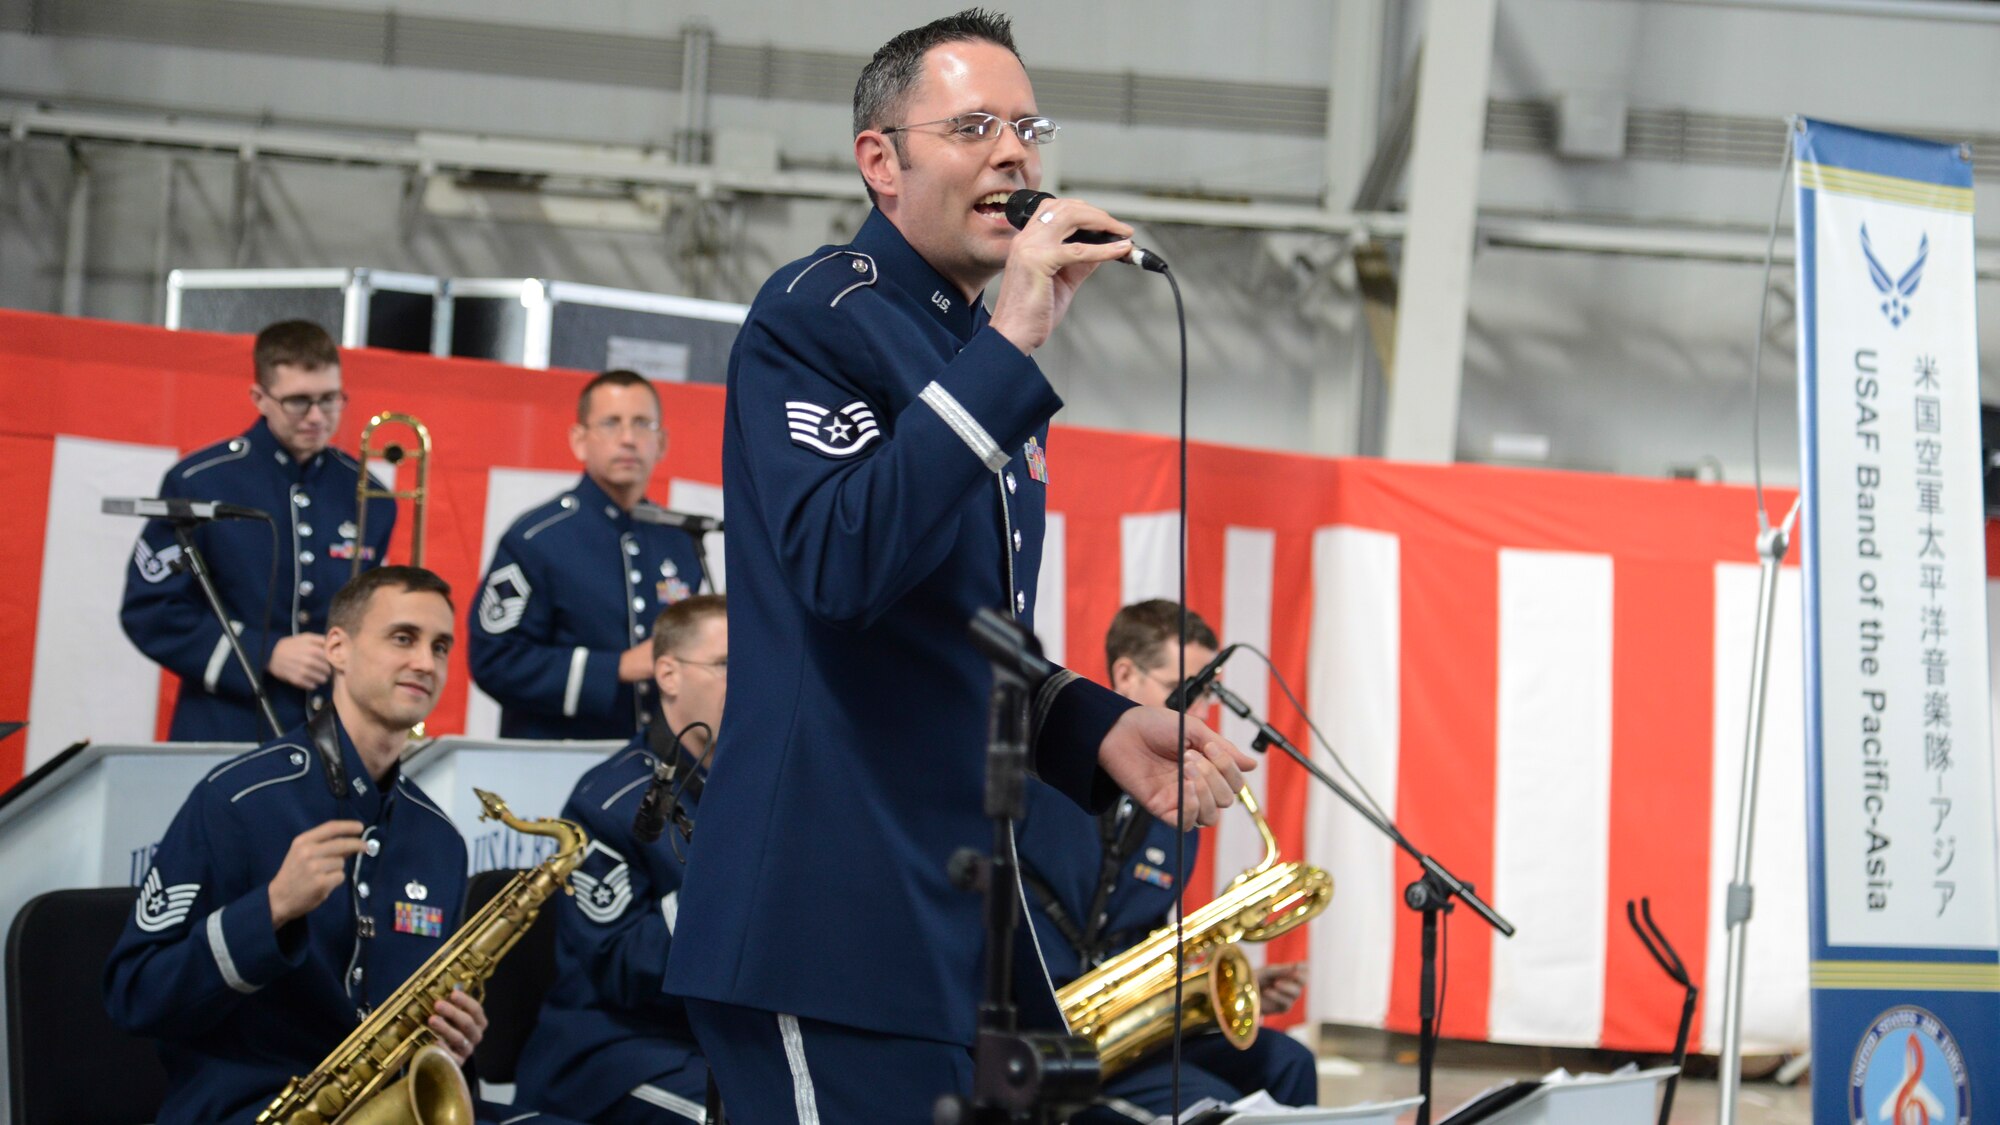 Staff Sgt. Geoff Fisher, Band of the Pacific-Asia vocalist, sings during the opening ceremony of the Iruma Air Show at Iruma Air Base, Japan, Nov. 3, 2013.  The band performed songs in both English and Japanese to entertain the attendants.  (U.S. Air Force photo by Airman 1st Class Soo C. Kim / Released)